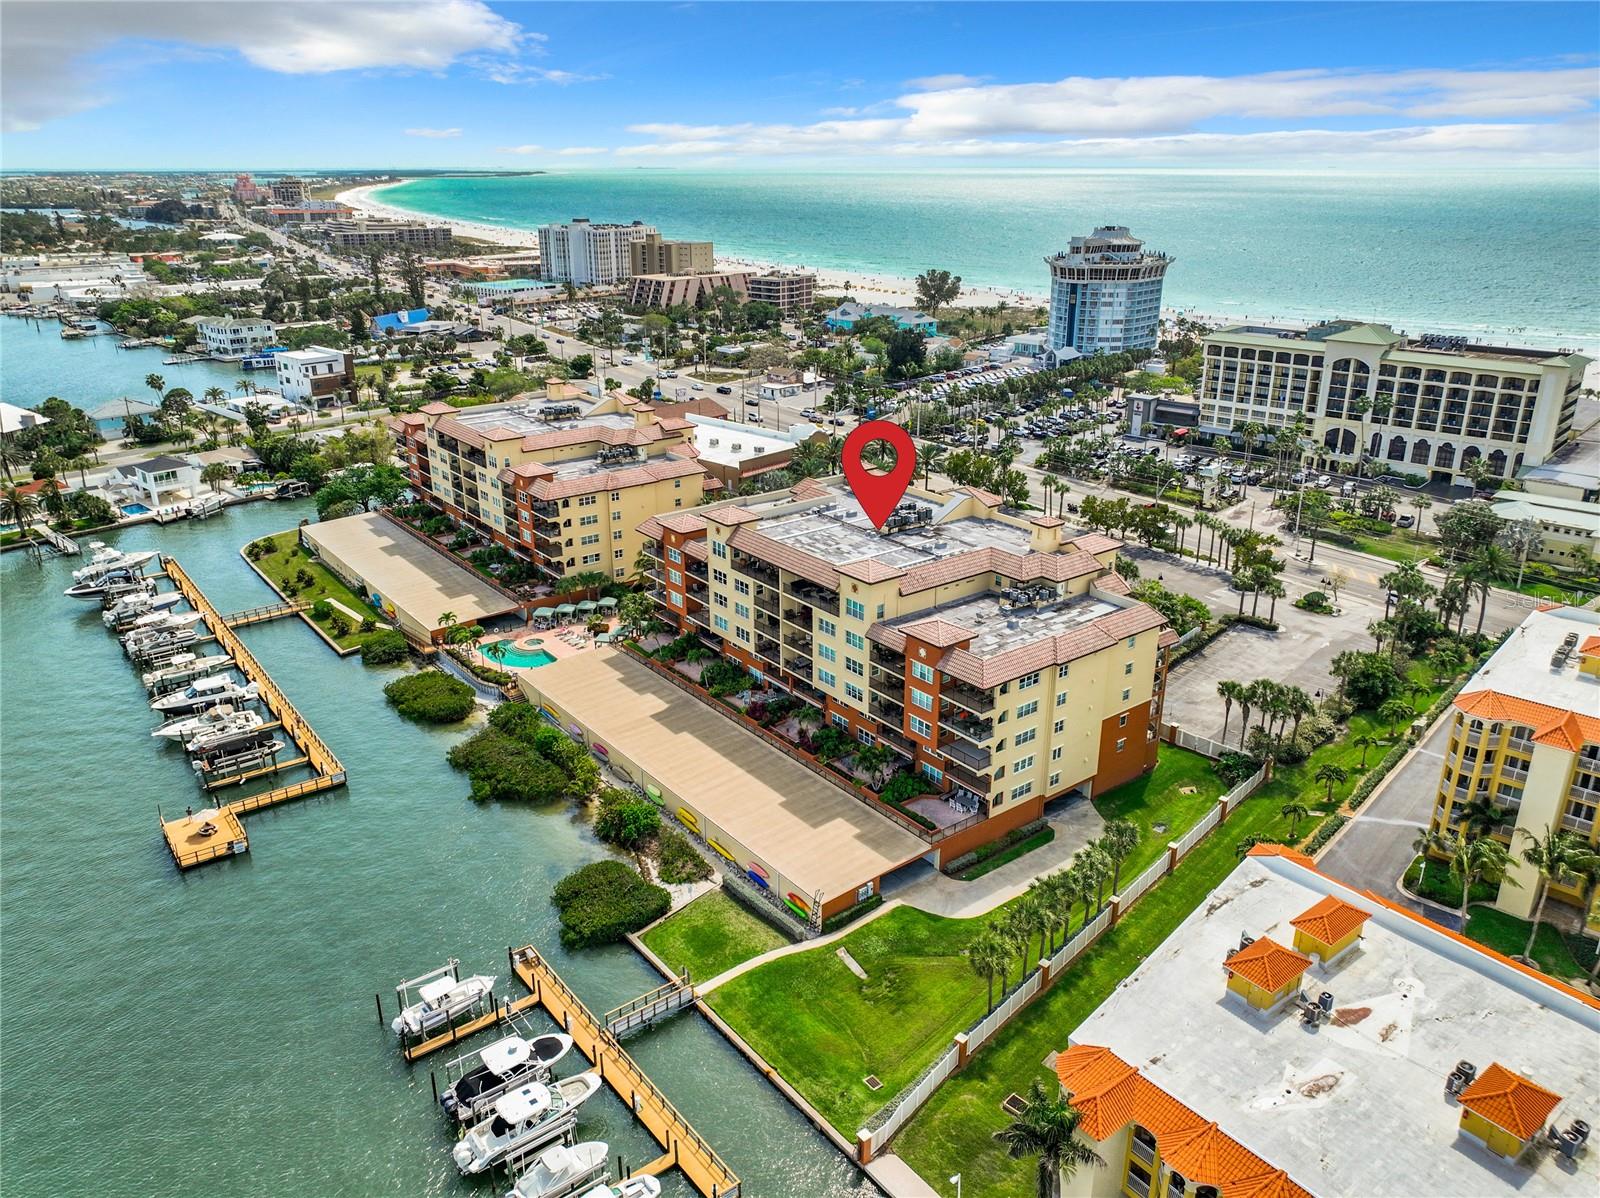 Great location offering both the best of both worlds with views of the Intracoastal waterway and the Gulf of Mexico